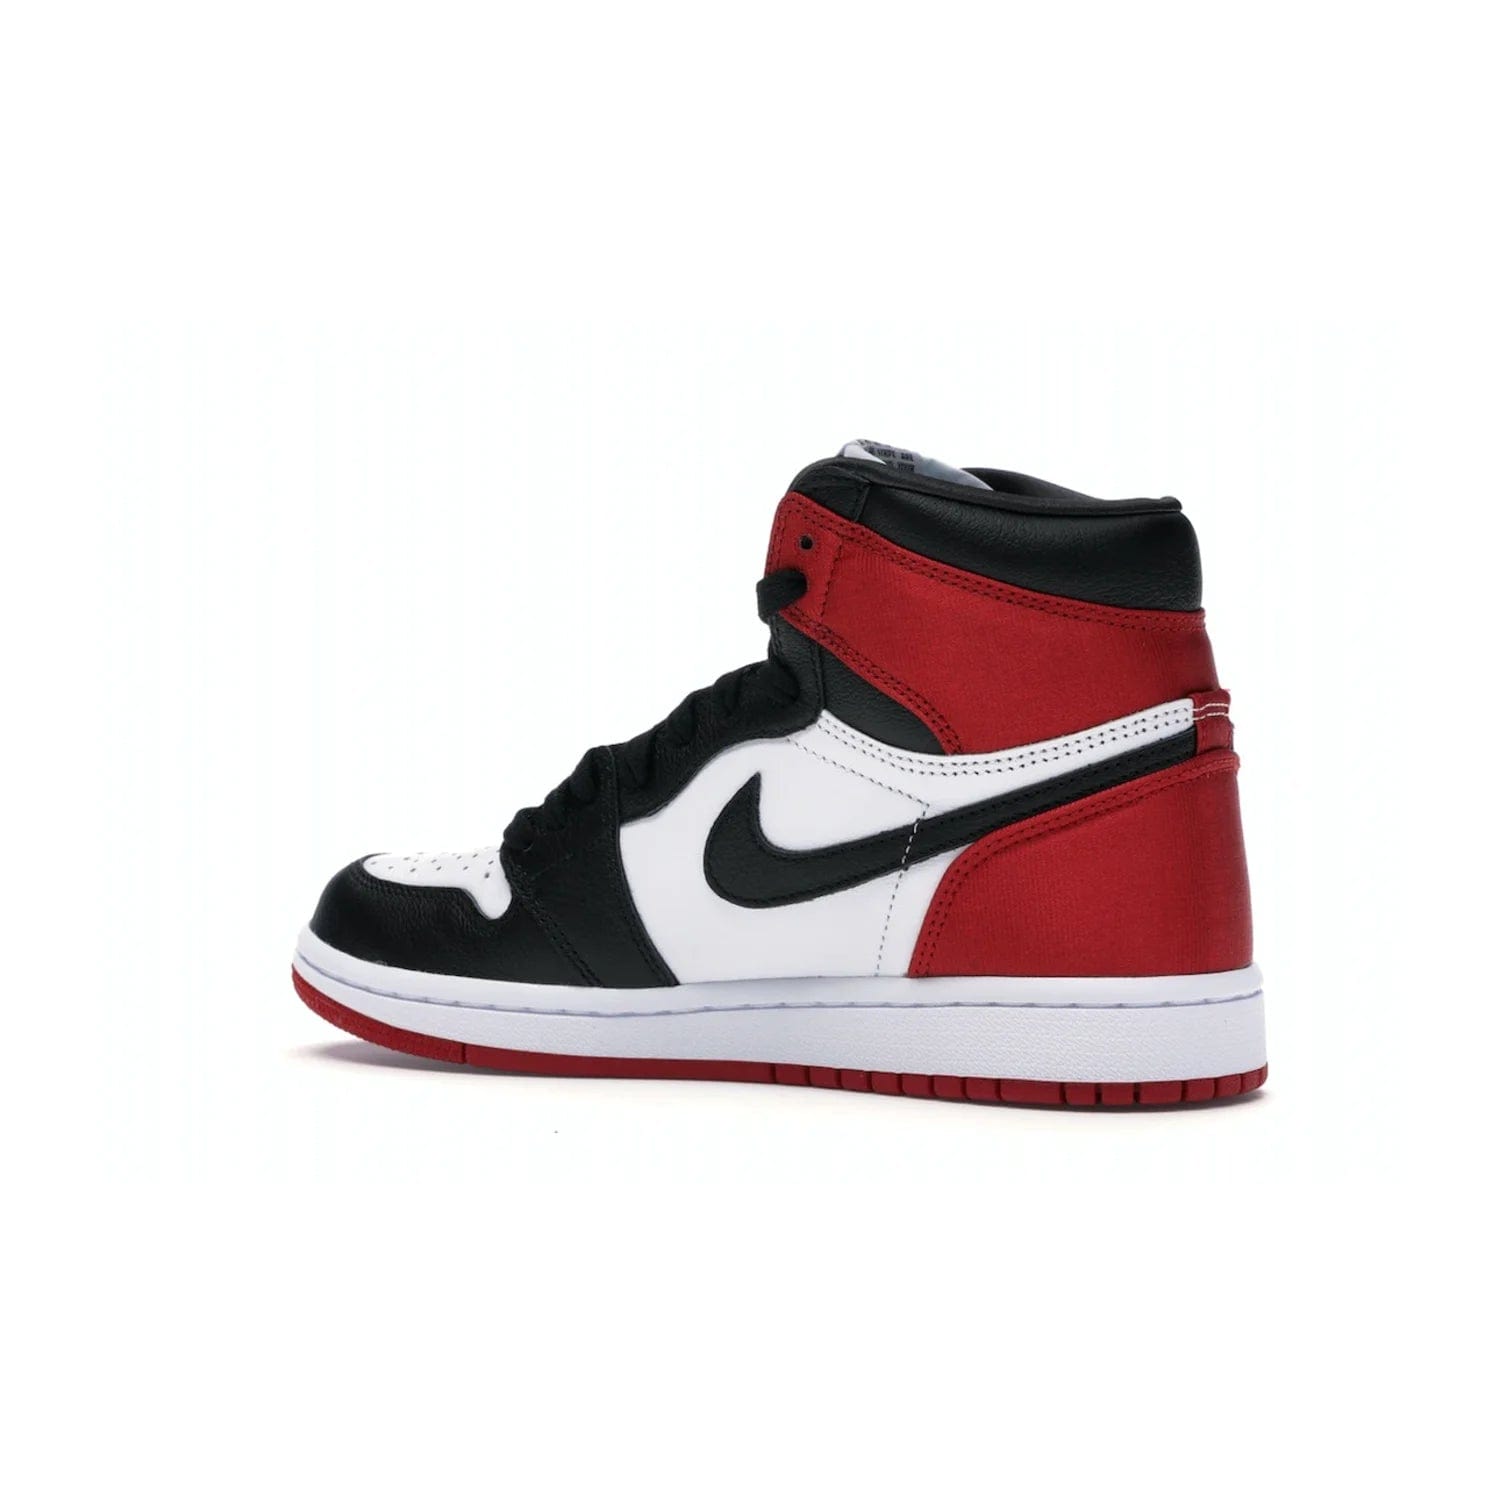 Jordan 1 Retro High Satin Black Toe (Women's) - Image 22 - Only at www.BallersClubKickz.com - Luxurious take on the timeless Air Jordan 1. Features a mix of black leather and satin materials with subtle University Red accents. Elevated look with metal Wings logo on the heel. Released in August 2019.